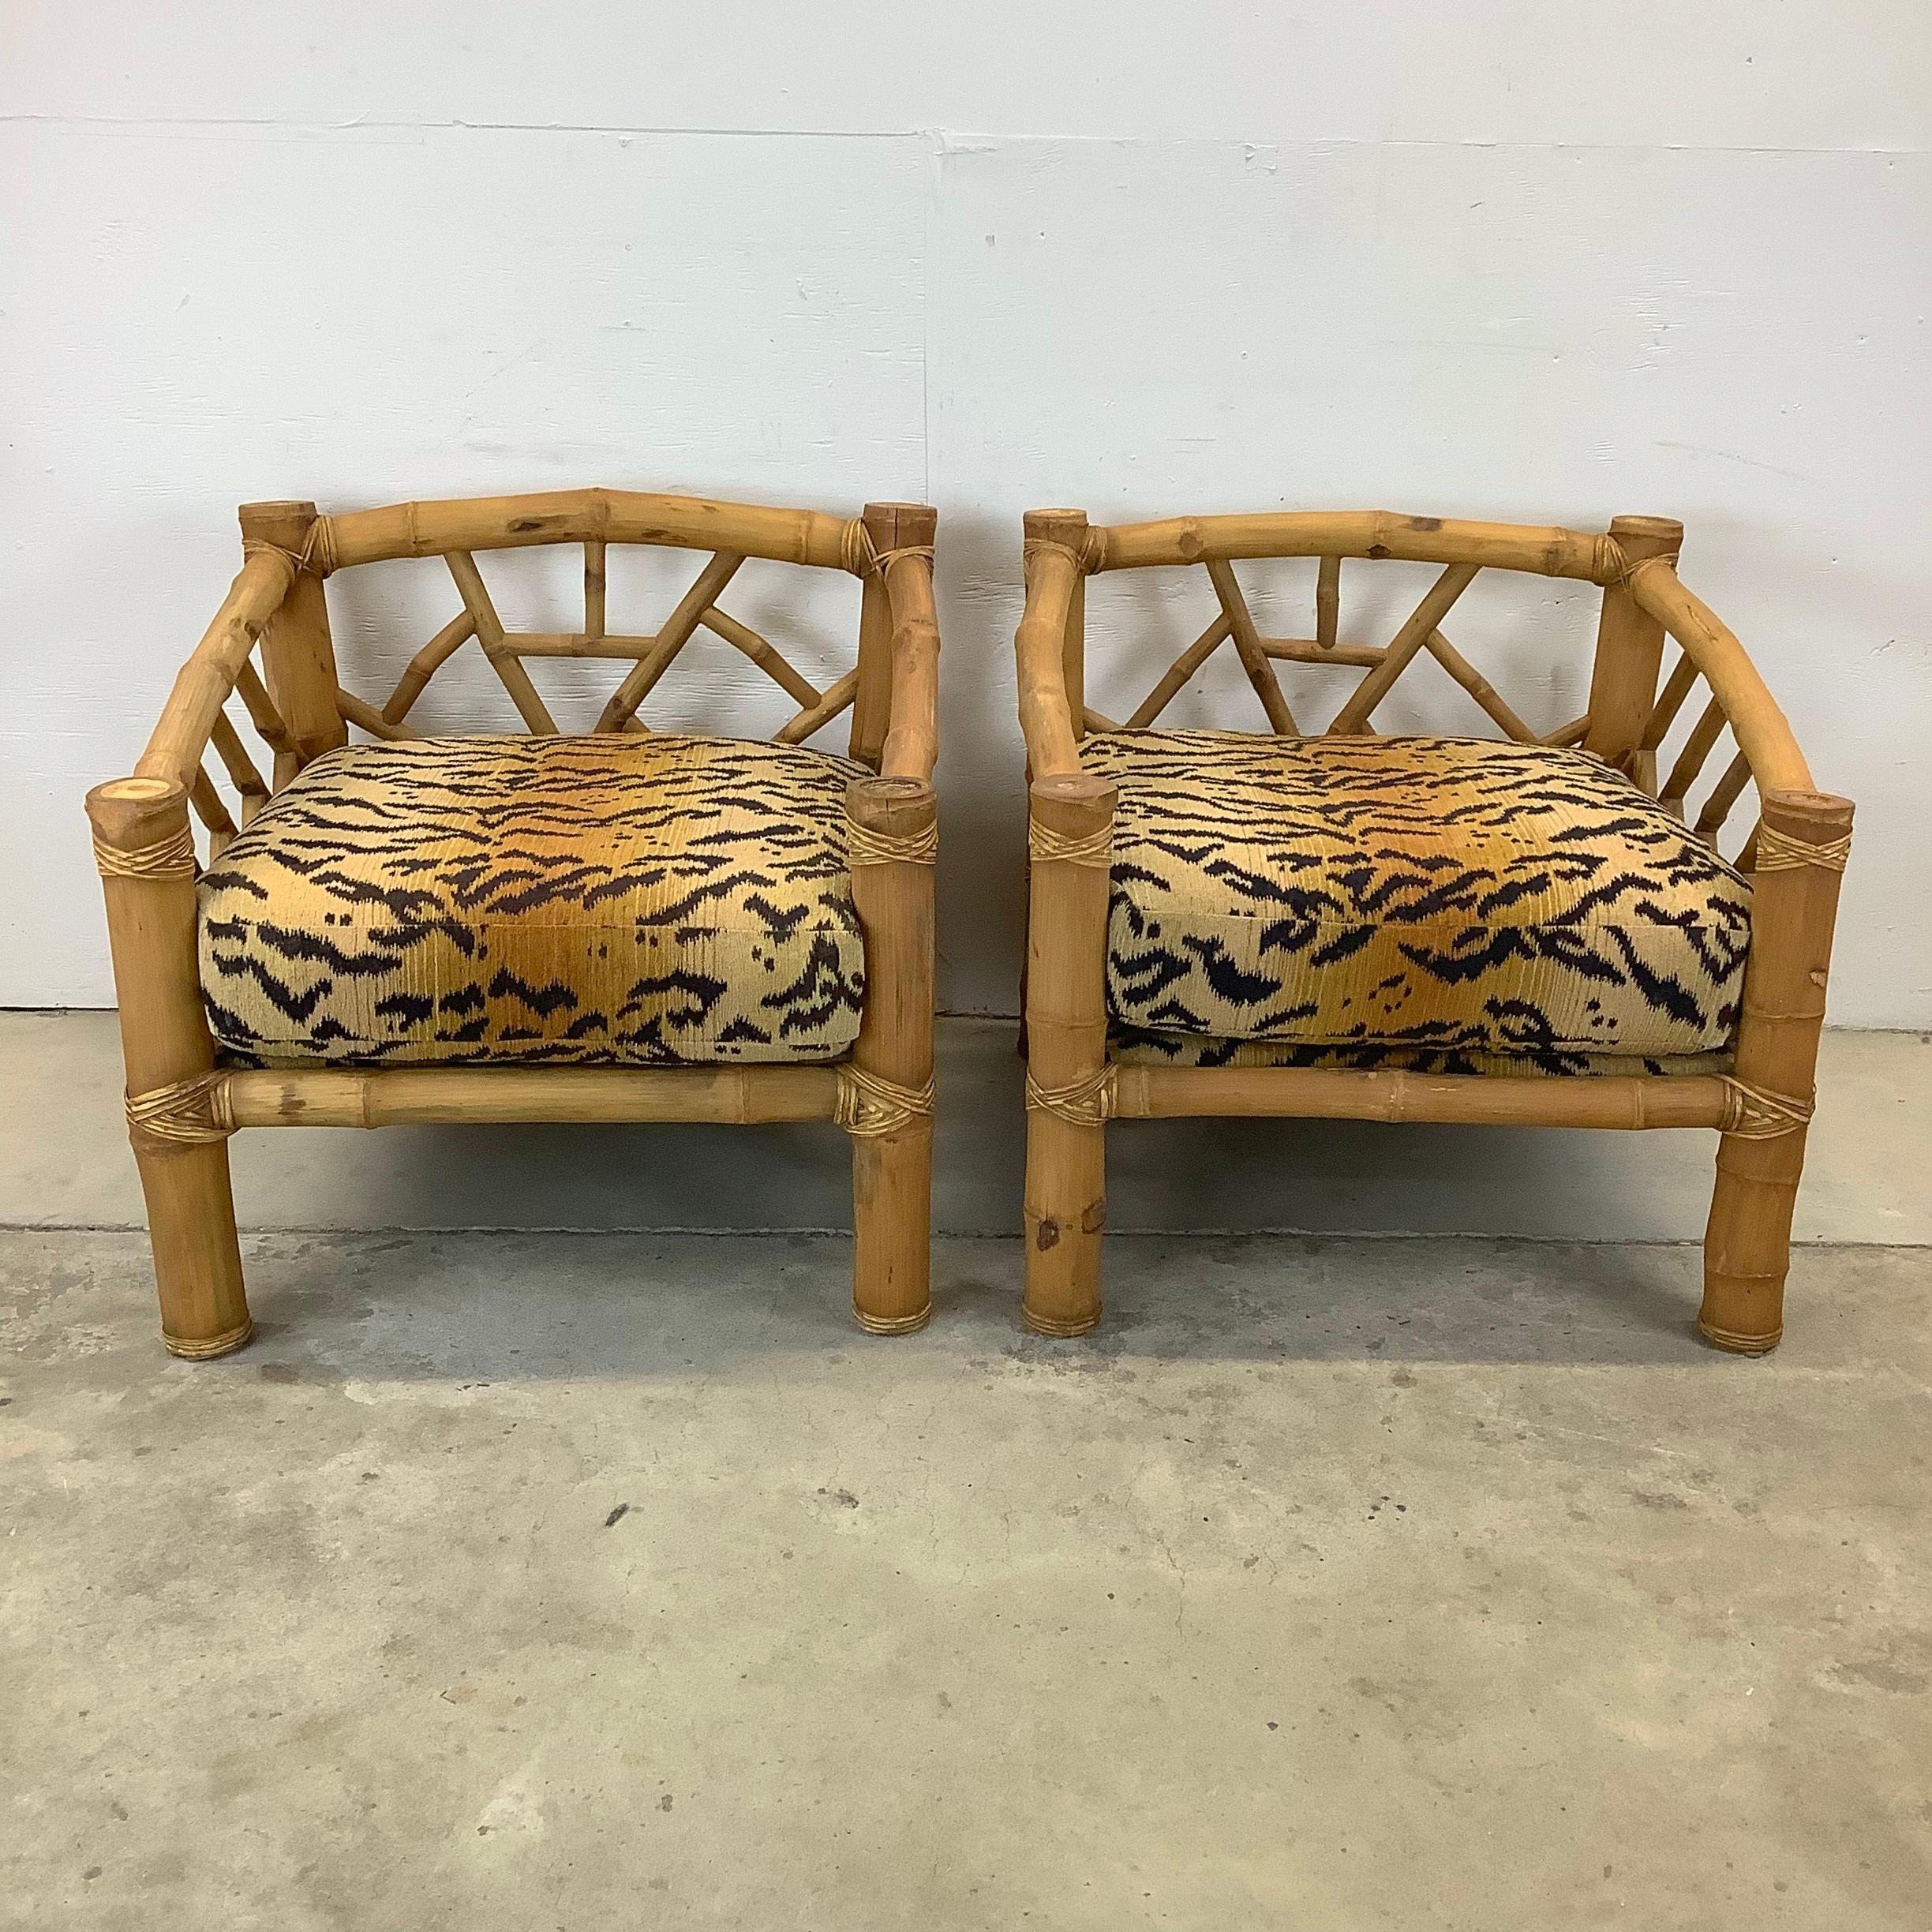 20th Century Pair Vintage Bamboo Armchairs & Ottoman in Tiger Print For Sale